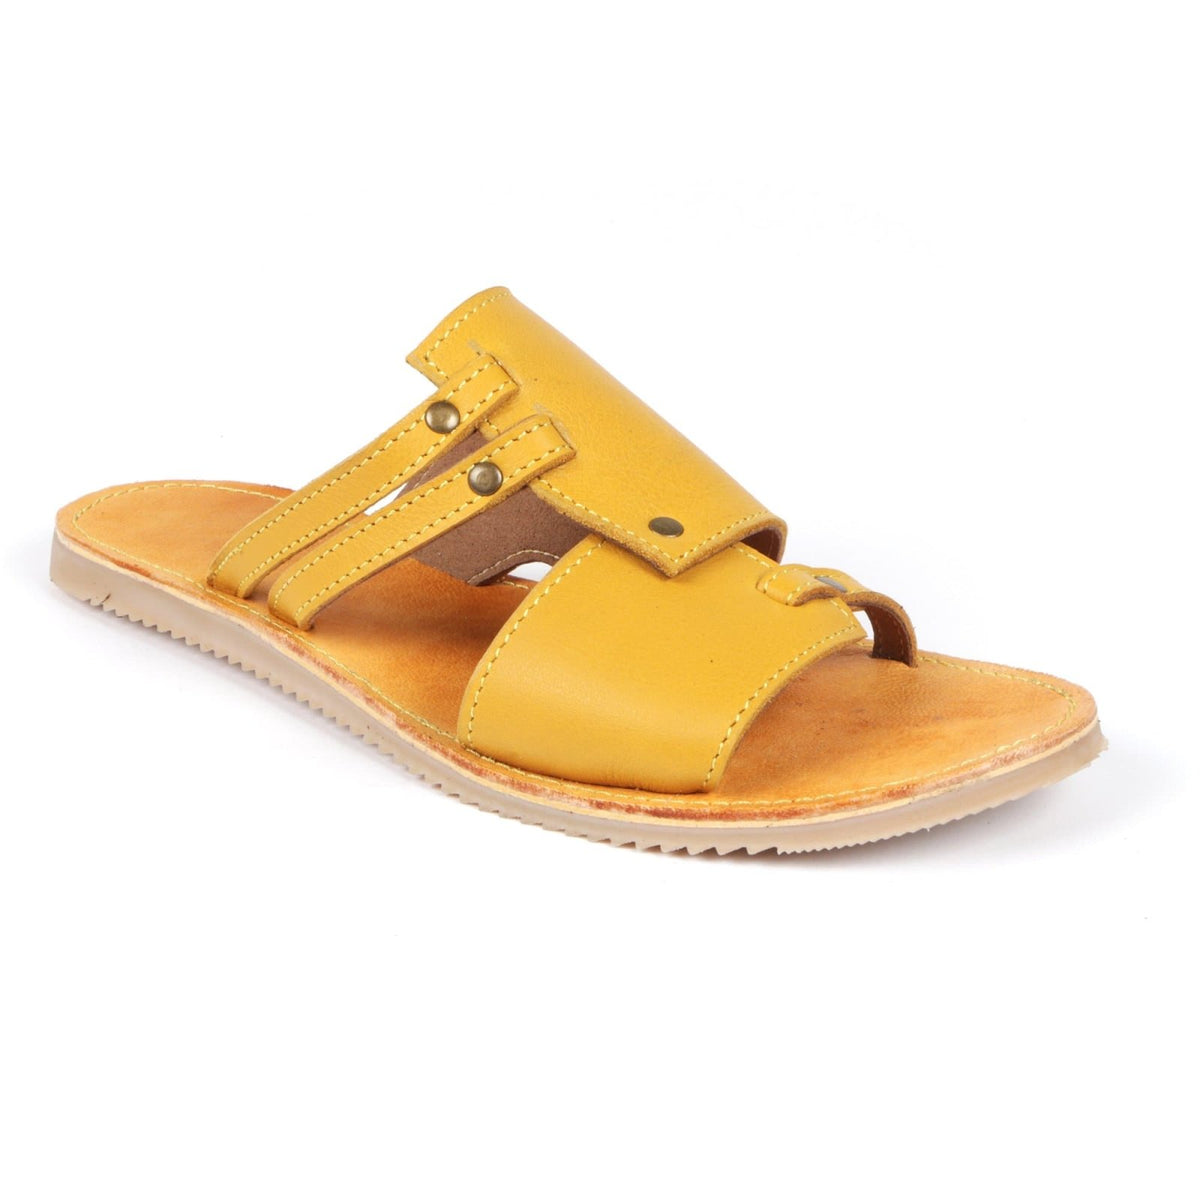 Freestyle Thandi Handcrafted Eco-friendly Ethnic Chic Premium Leather Sandal - Freestyle SA Proudly local leather boots veldskoens vellies leather shoes suede veldskoens